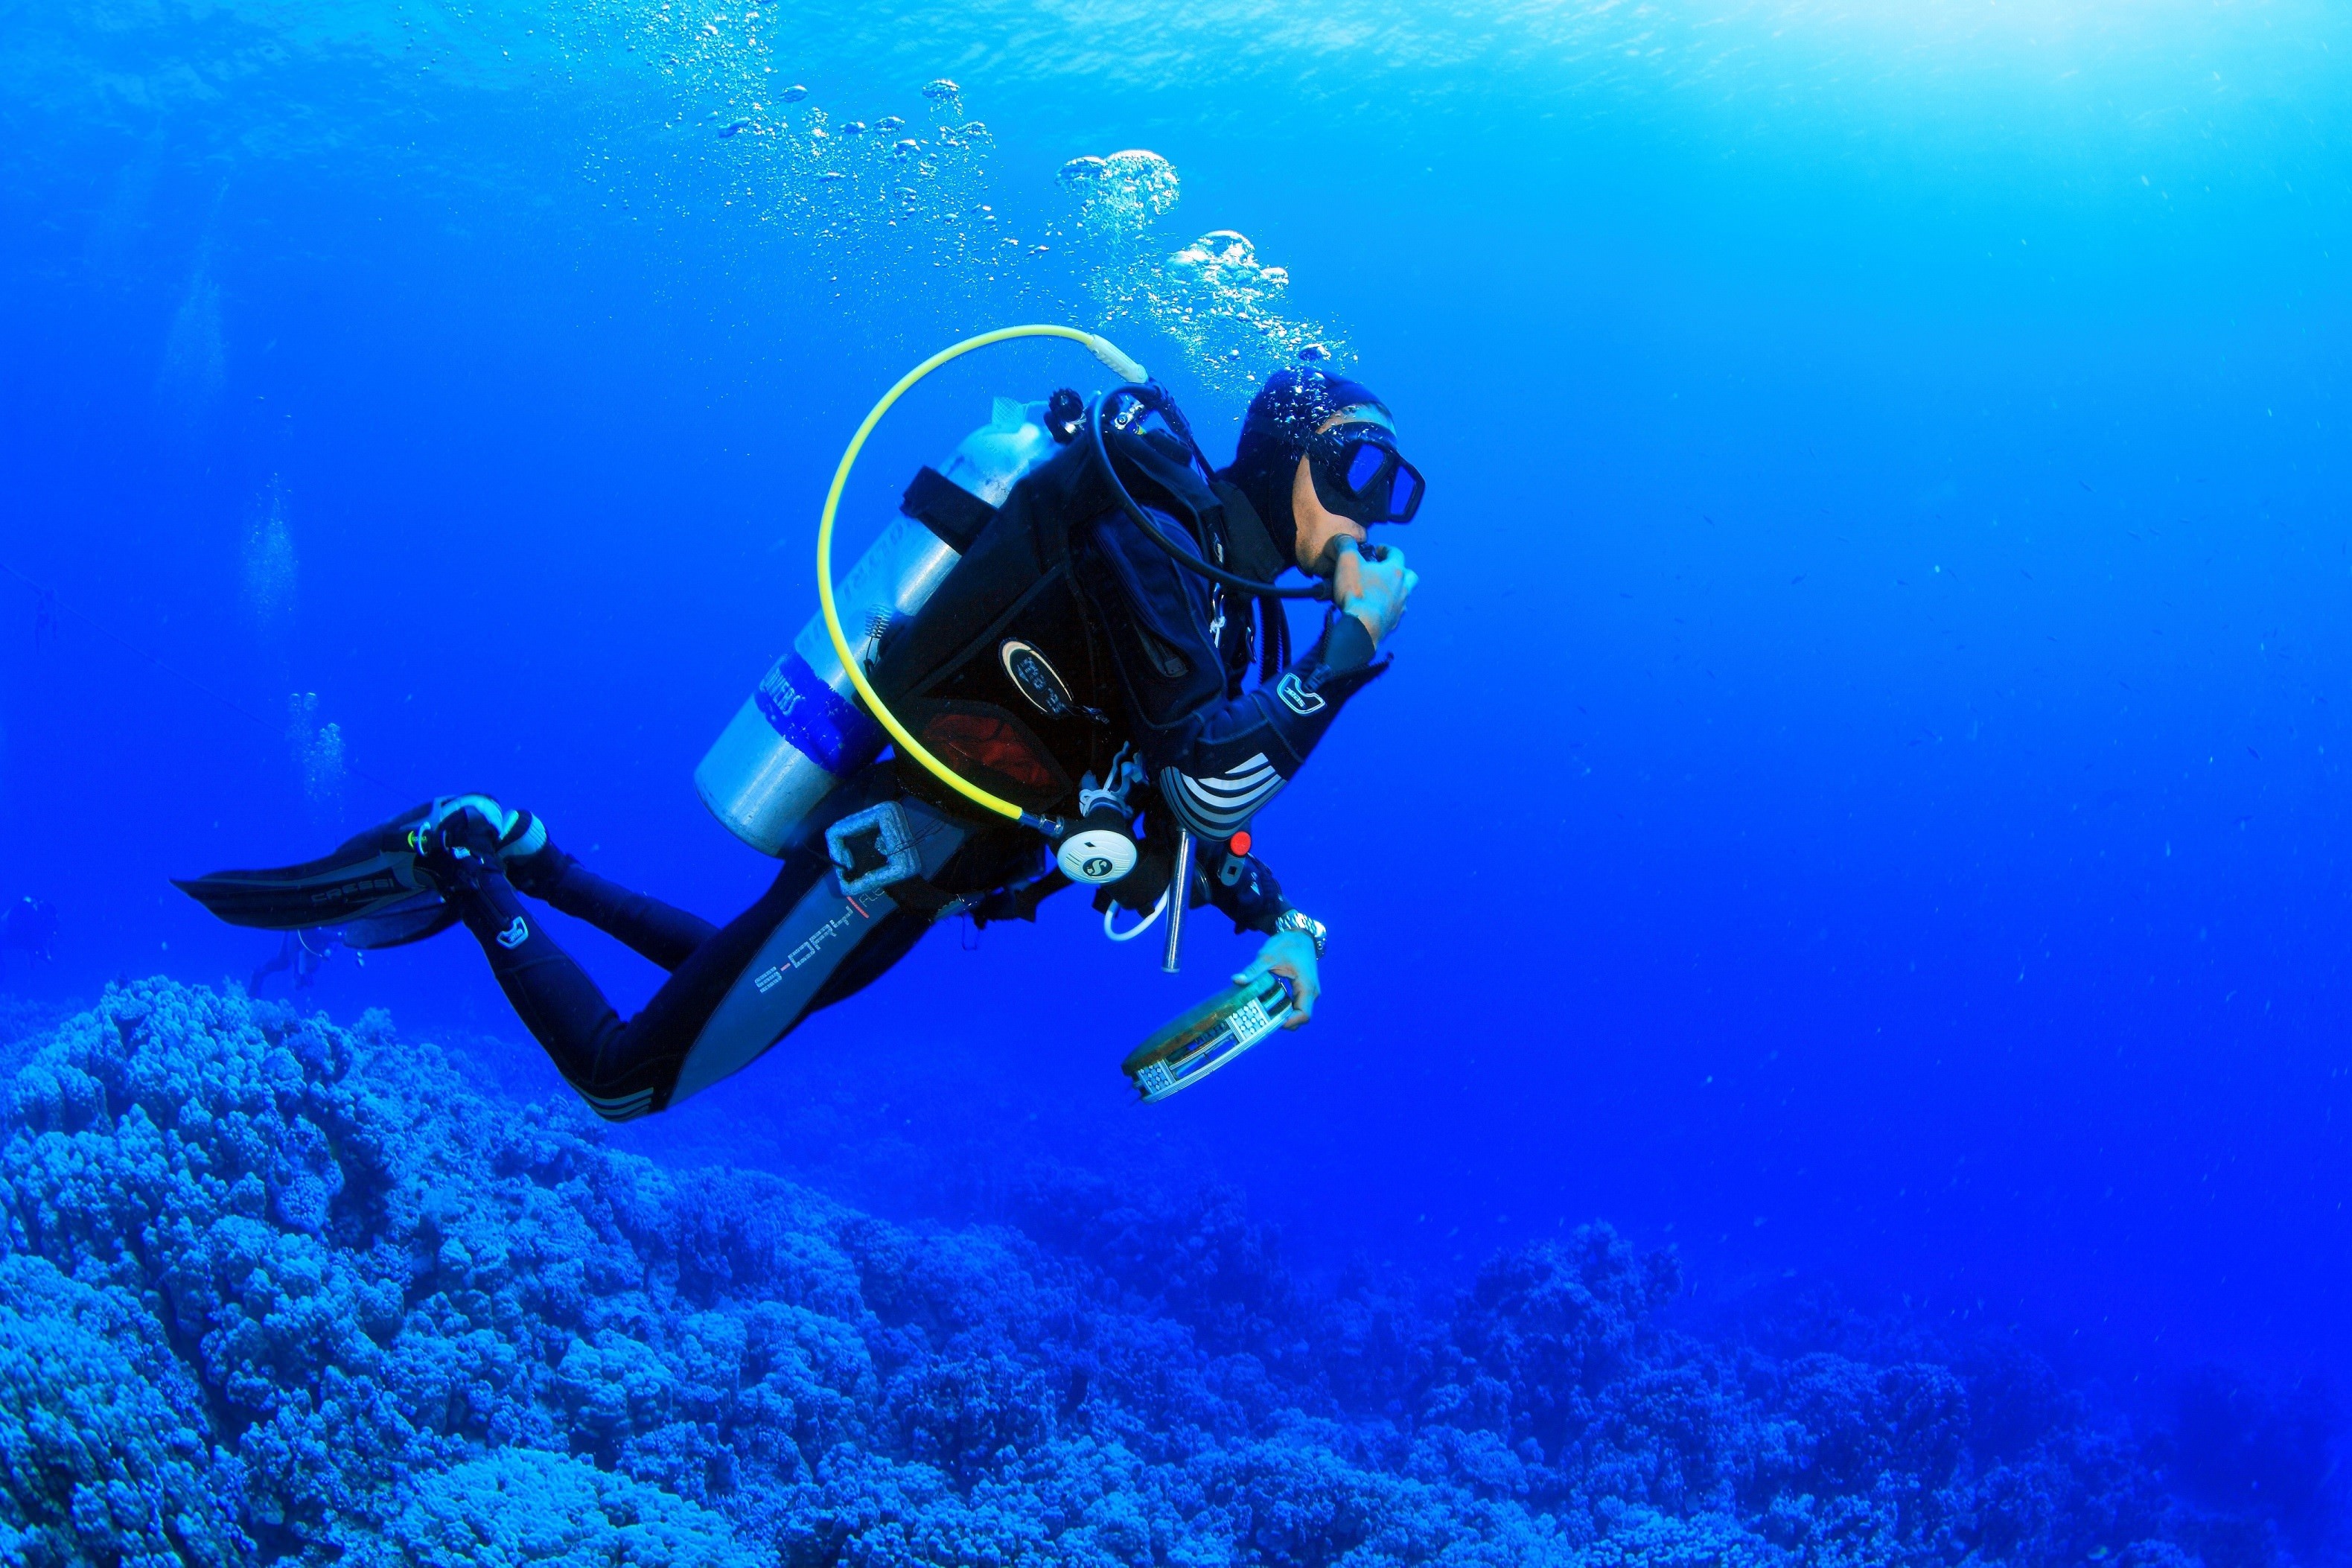 Diving: An extreme adventurous underwater activity, Swimming underwater for a long time. 3160x2110 HD Wallpaper.